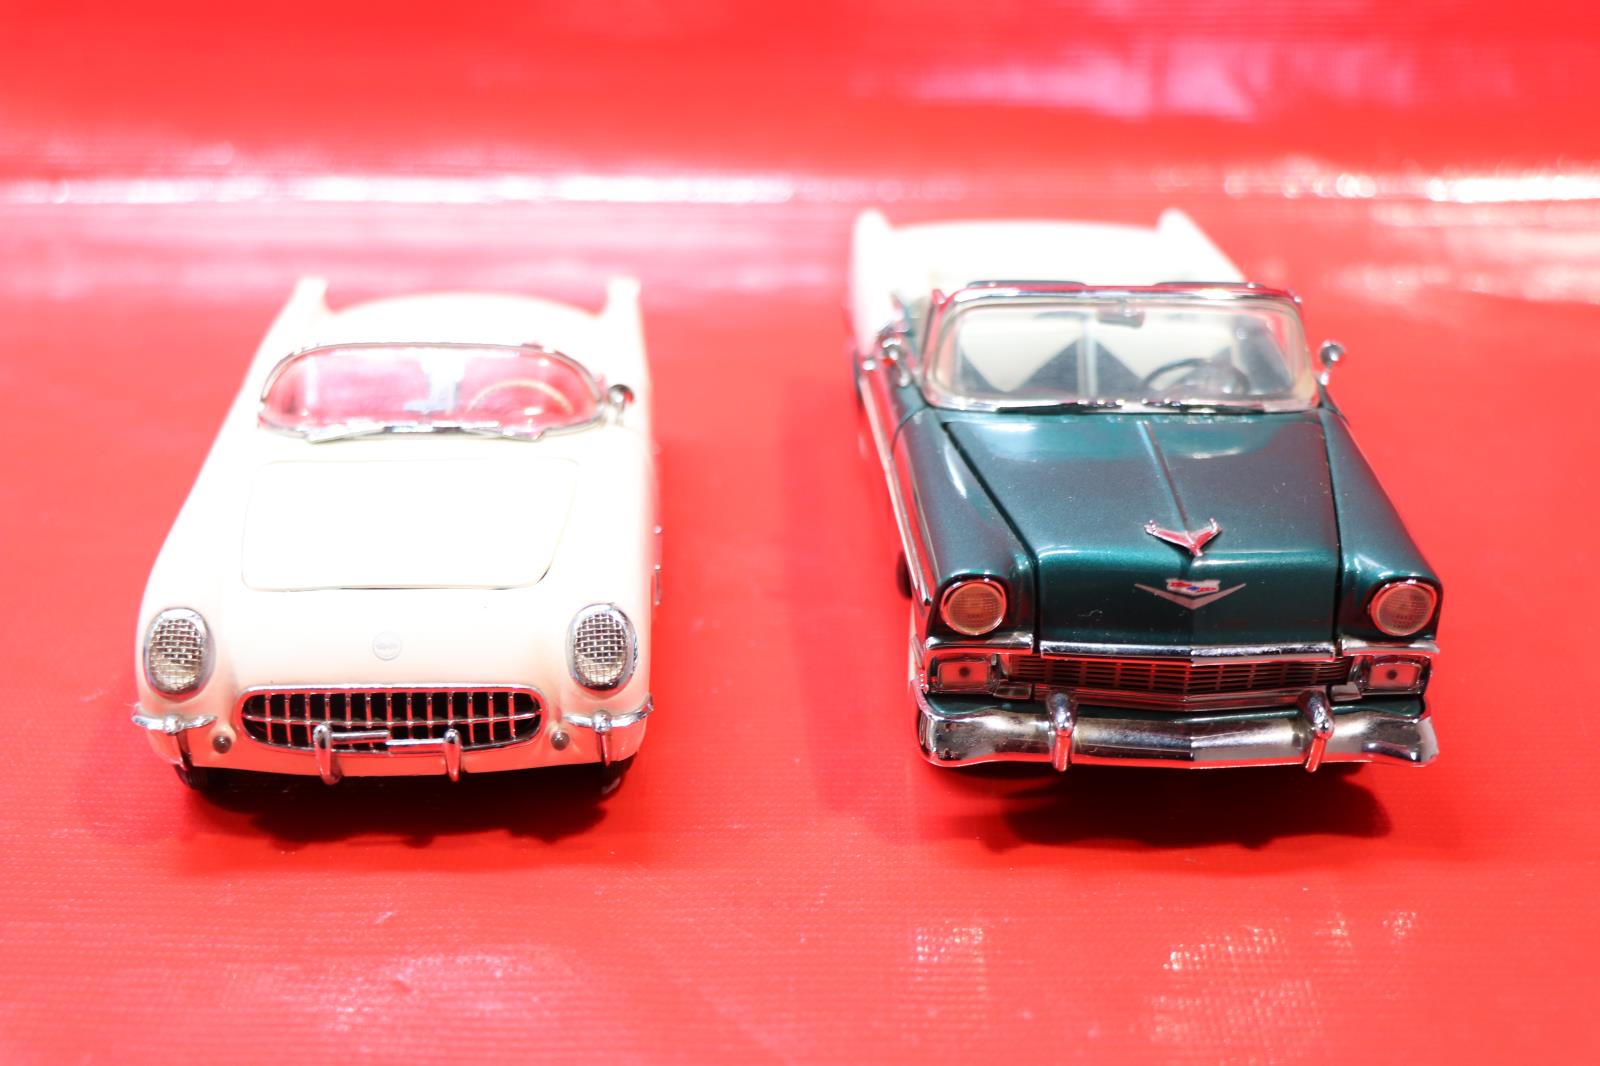 Lot Of 2 - Franklin Mint Precision Models - 1:24 - Collectable Diecast